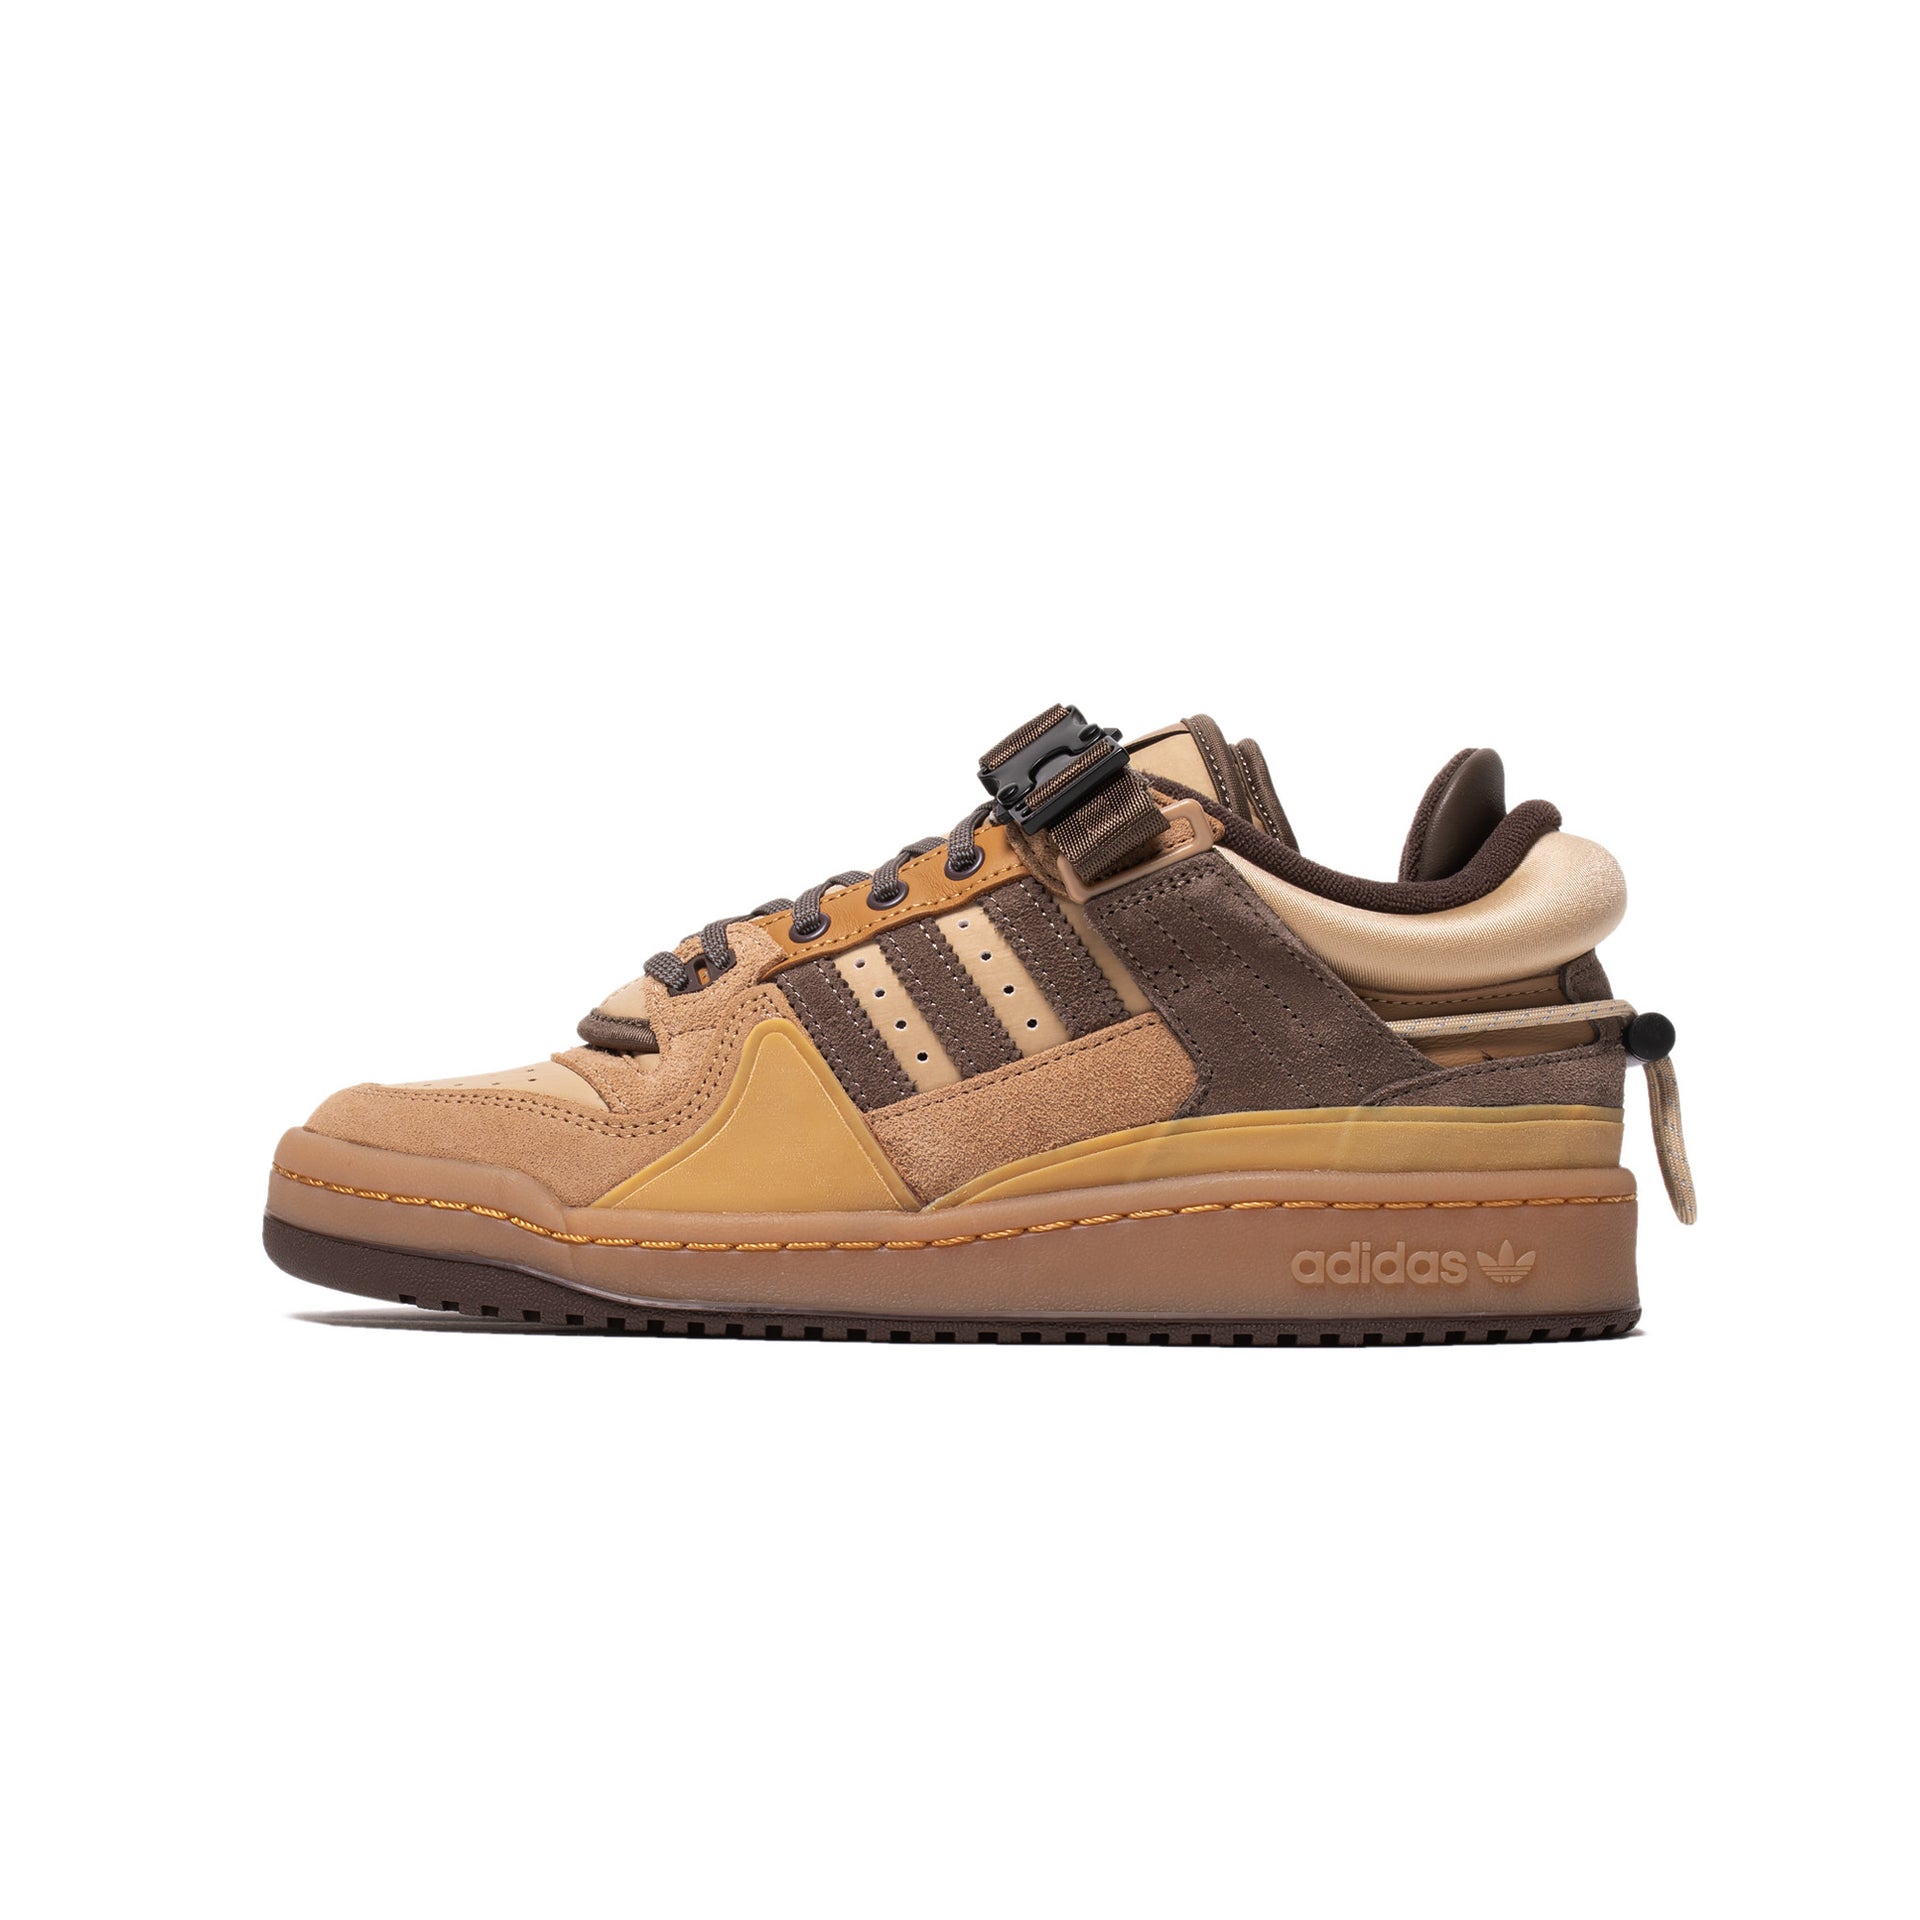 Adidas x Bad Bunny Mens Forum 84 Lo Shoes – Extra Butter